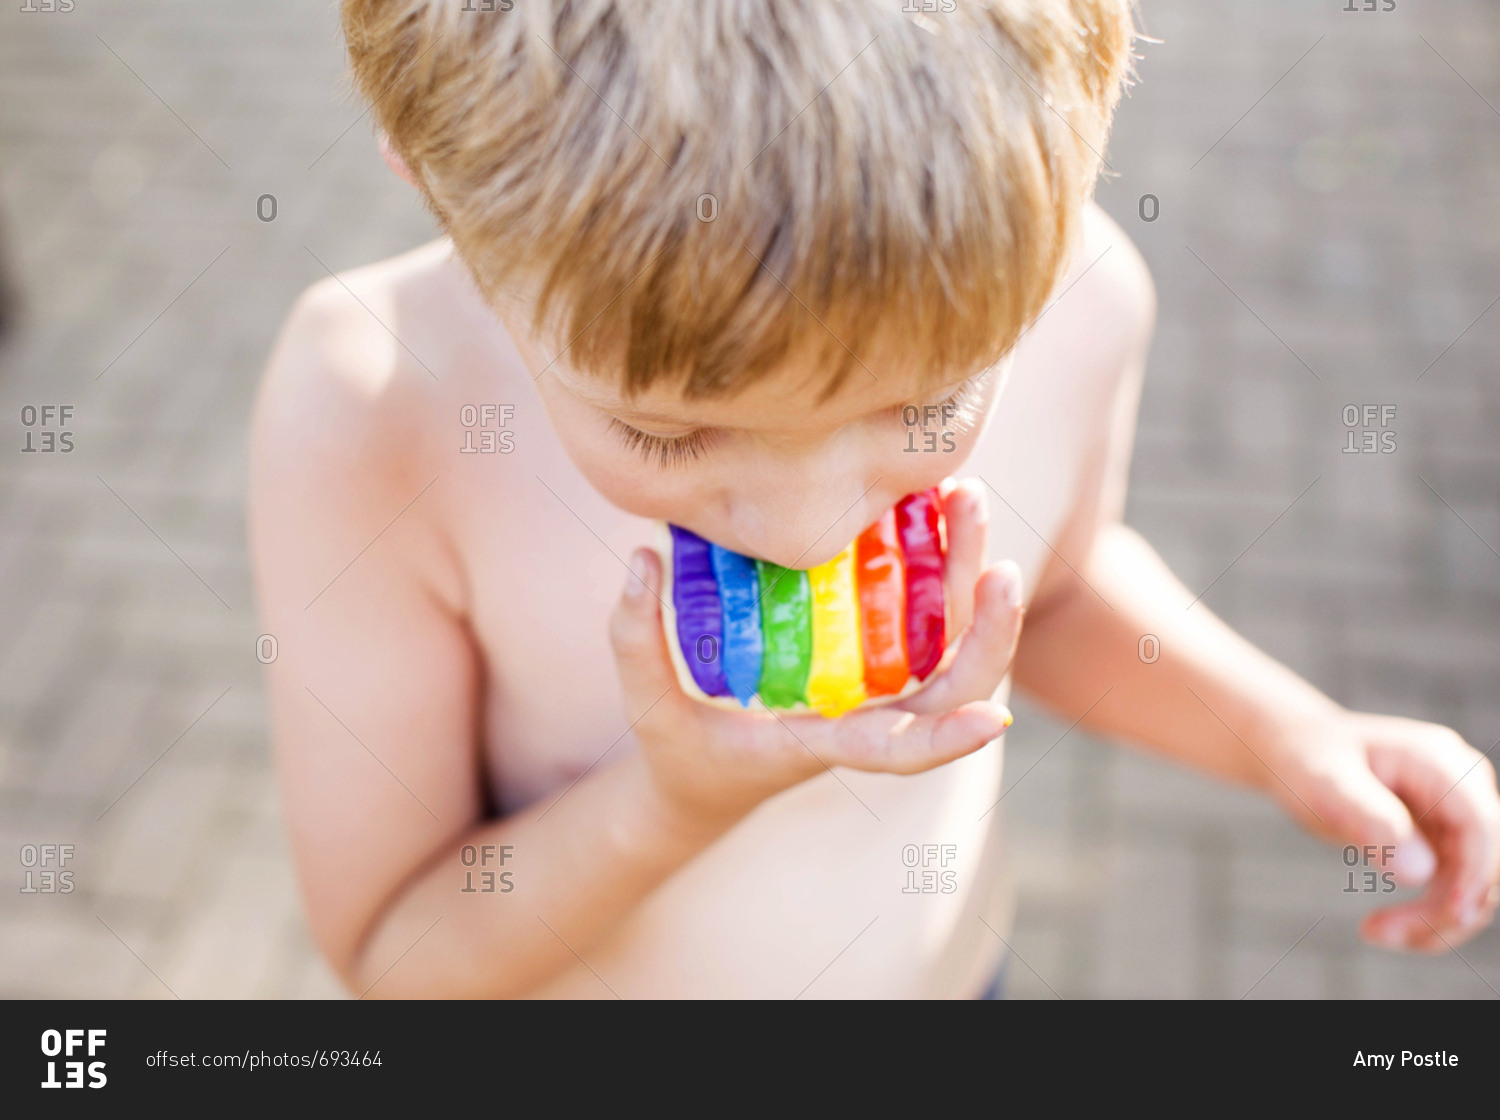 Overhead view of a child taking a bite of a rainbow cookie